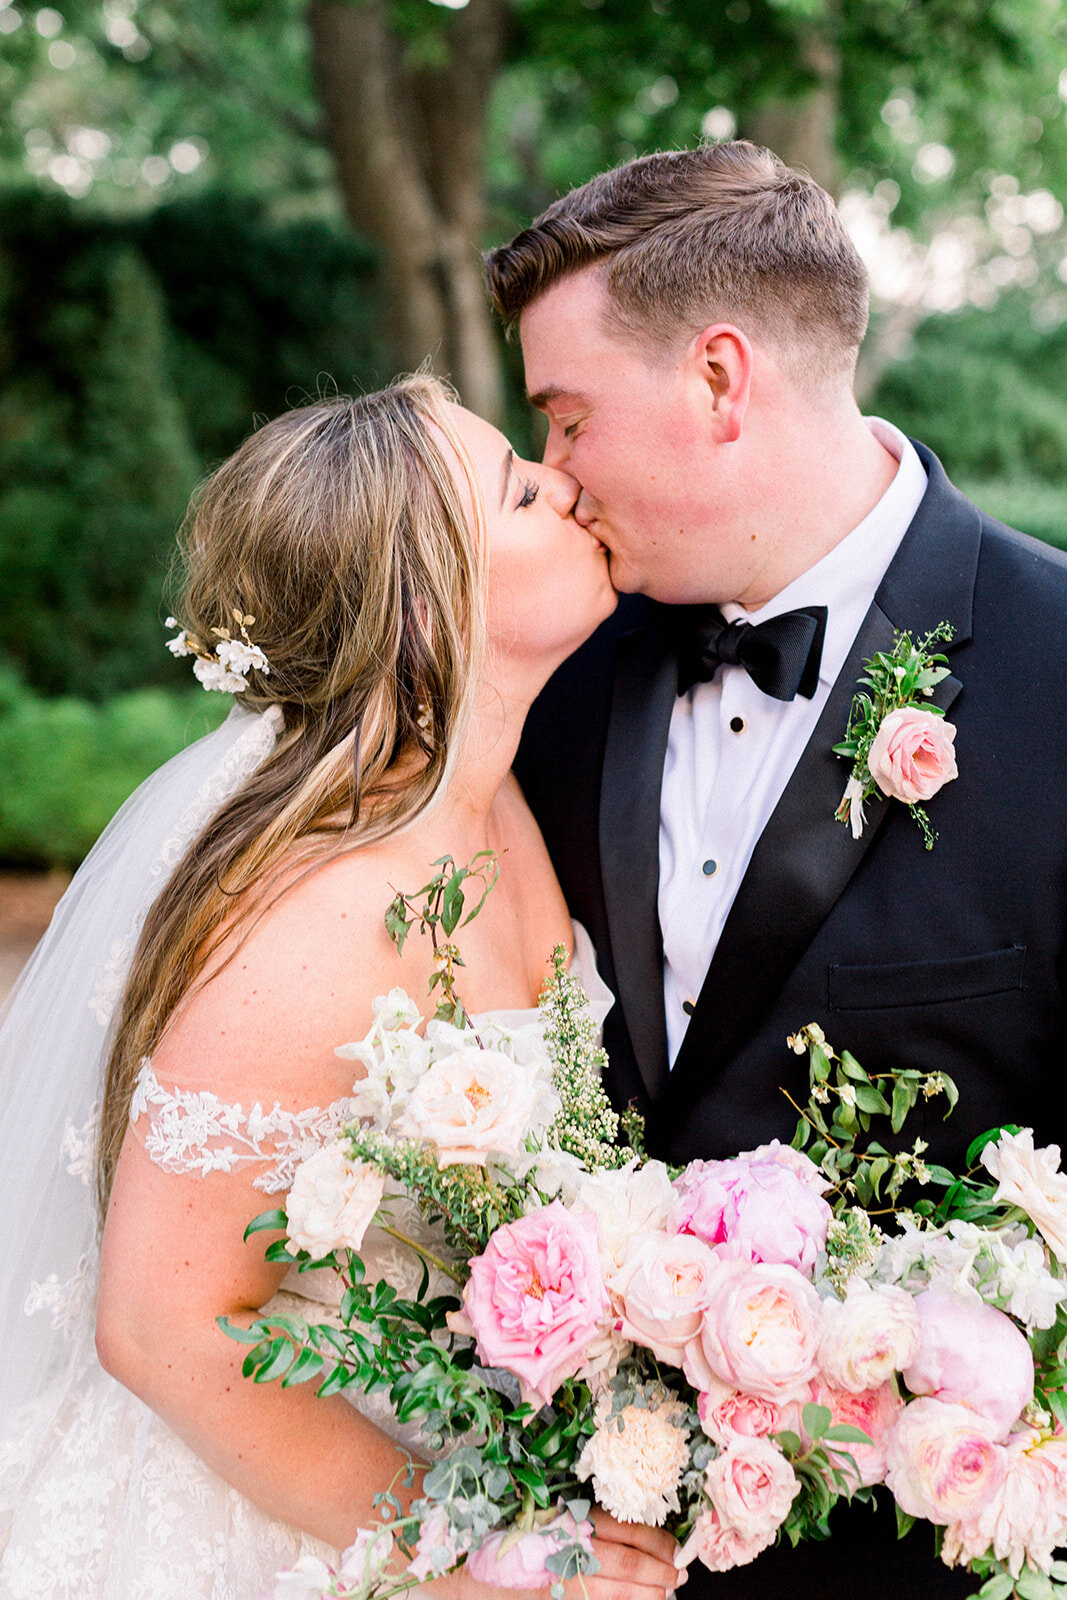 A lush bridal bouquet filled with hues of blush, pink, and ivory. Garden roses, majolica spray roses, champagne roses, peonies, picotee ranunculus, and spirea make up this fairytale bouquet. Designed by Rosemary & Finch in Nashville, TN.